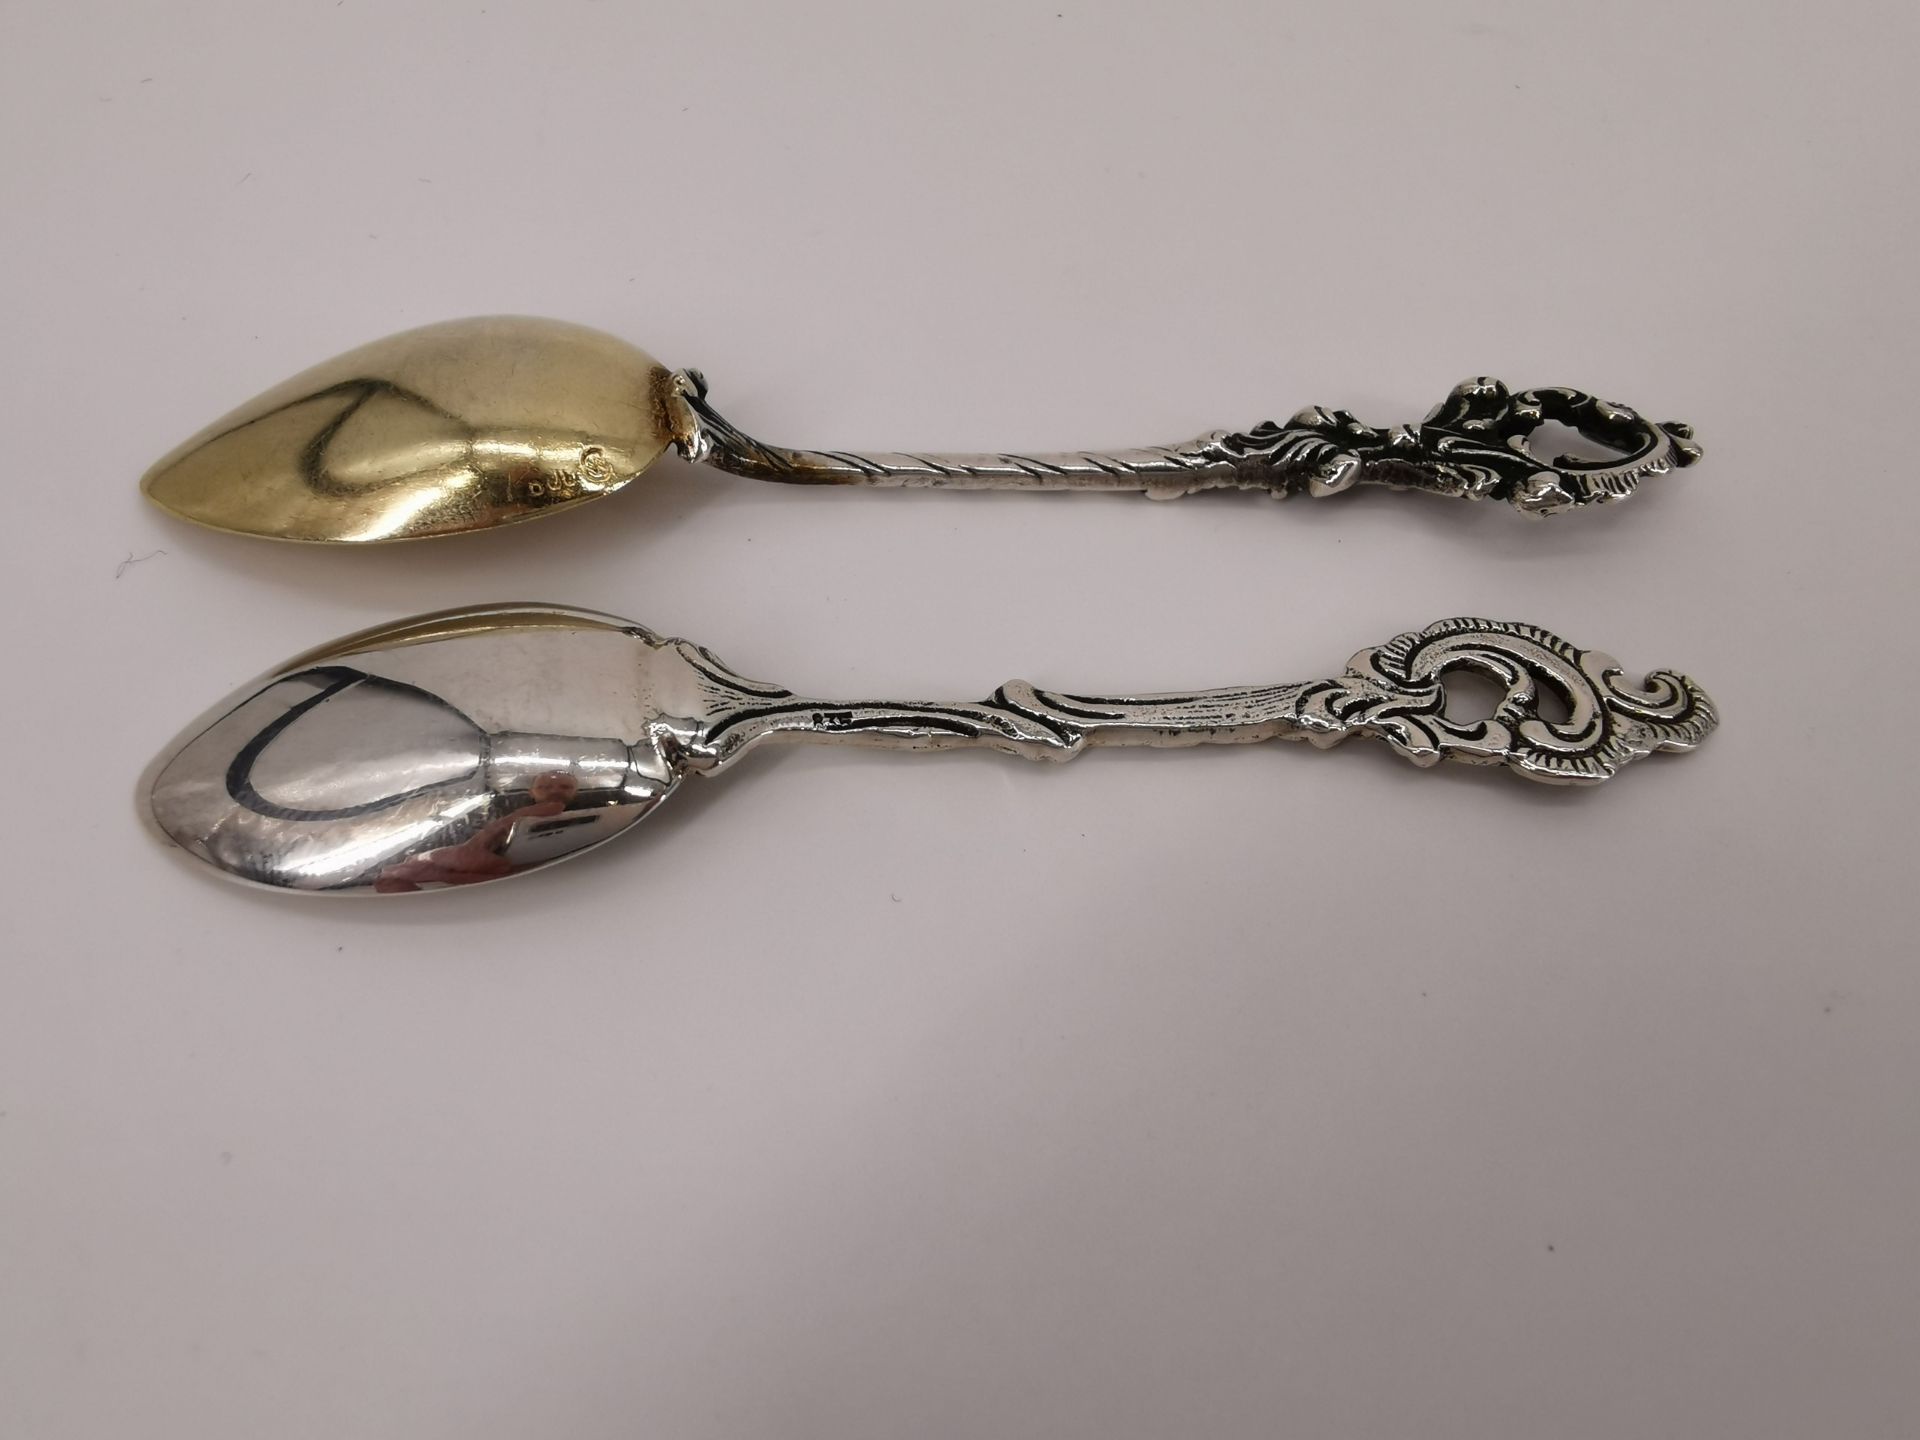 8 COFFEE SPOONS AND 4 MOCHA SPOONS - Image 3 of 3